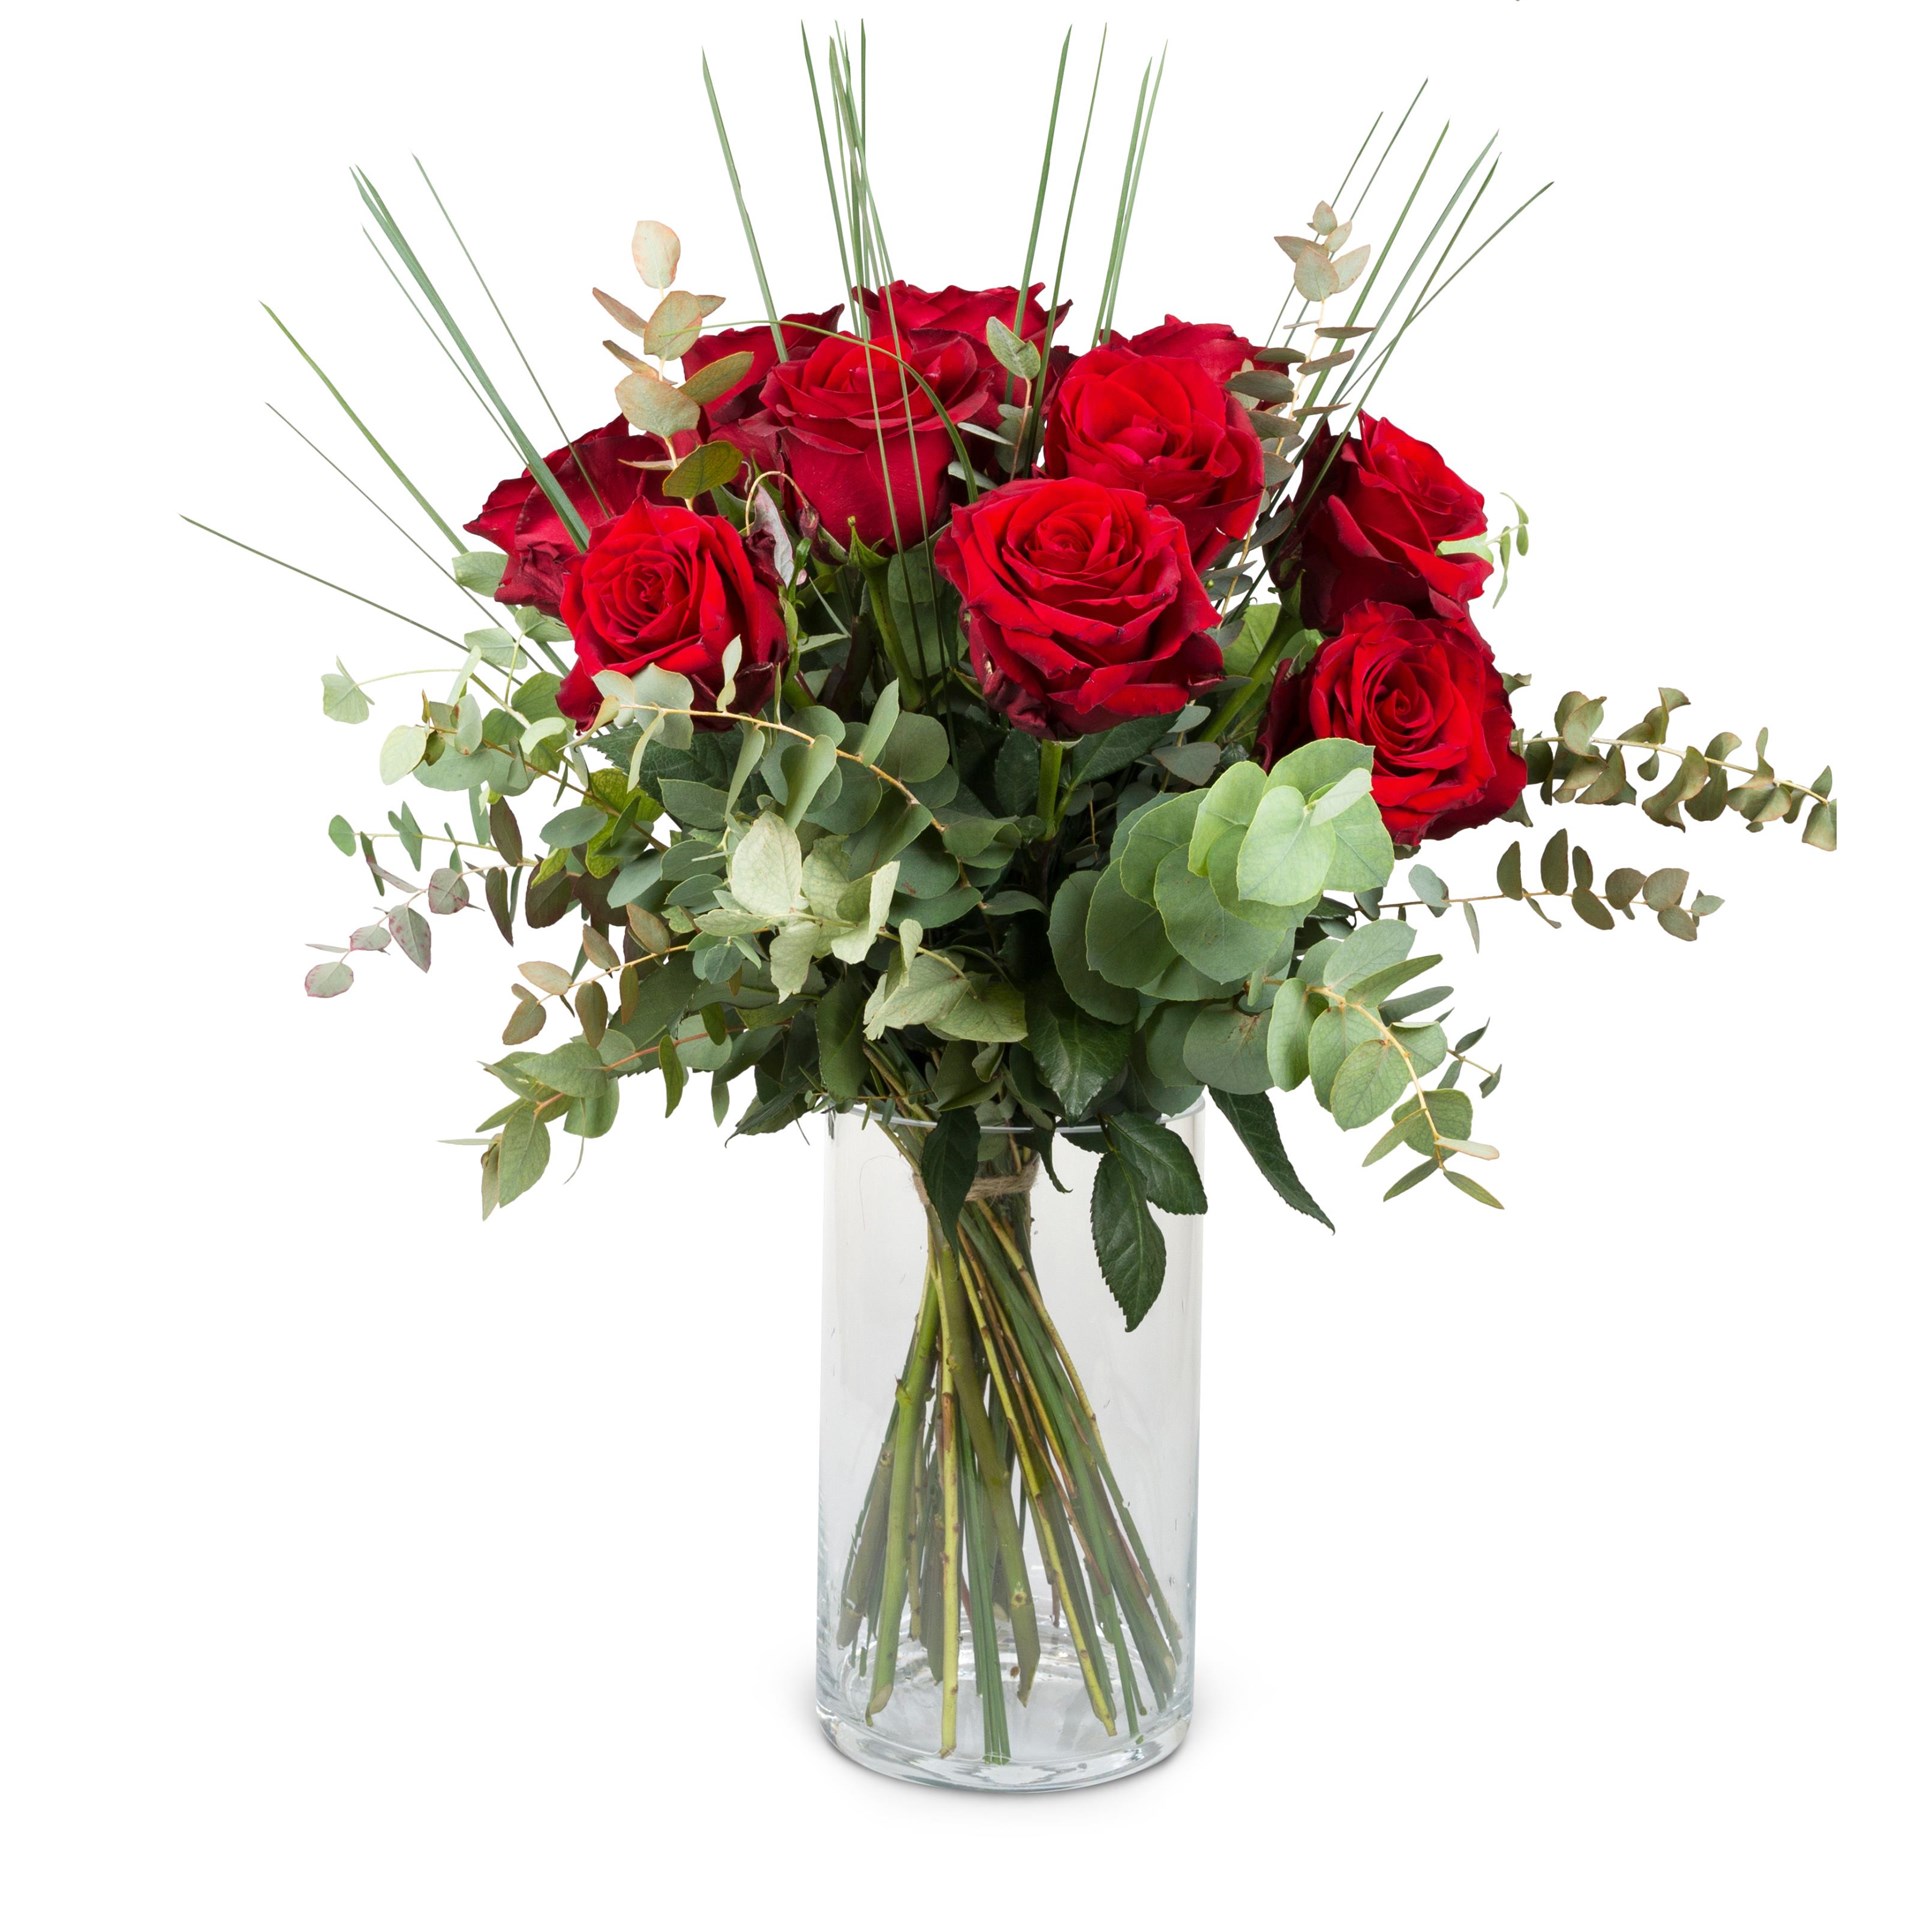 product image for 12 Red Roses with greenery